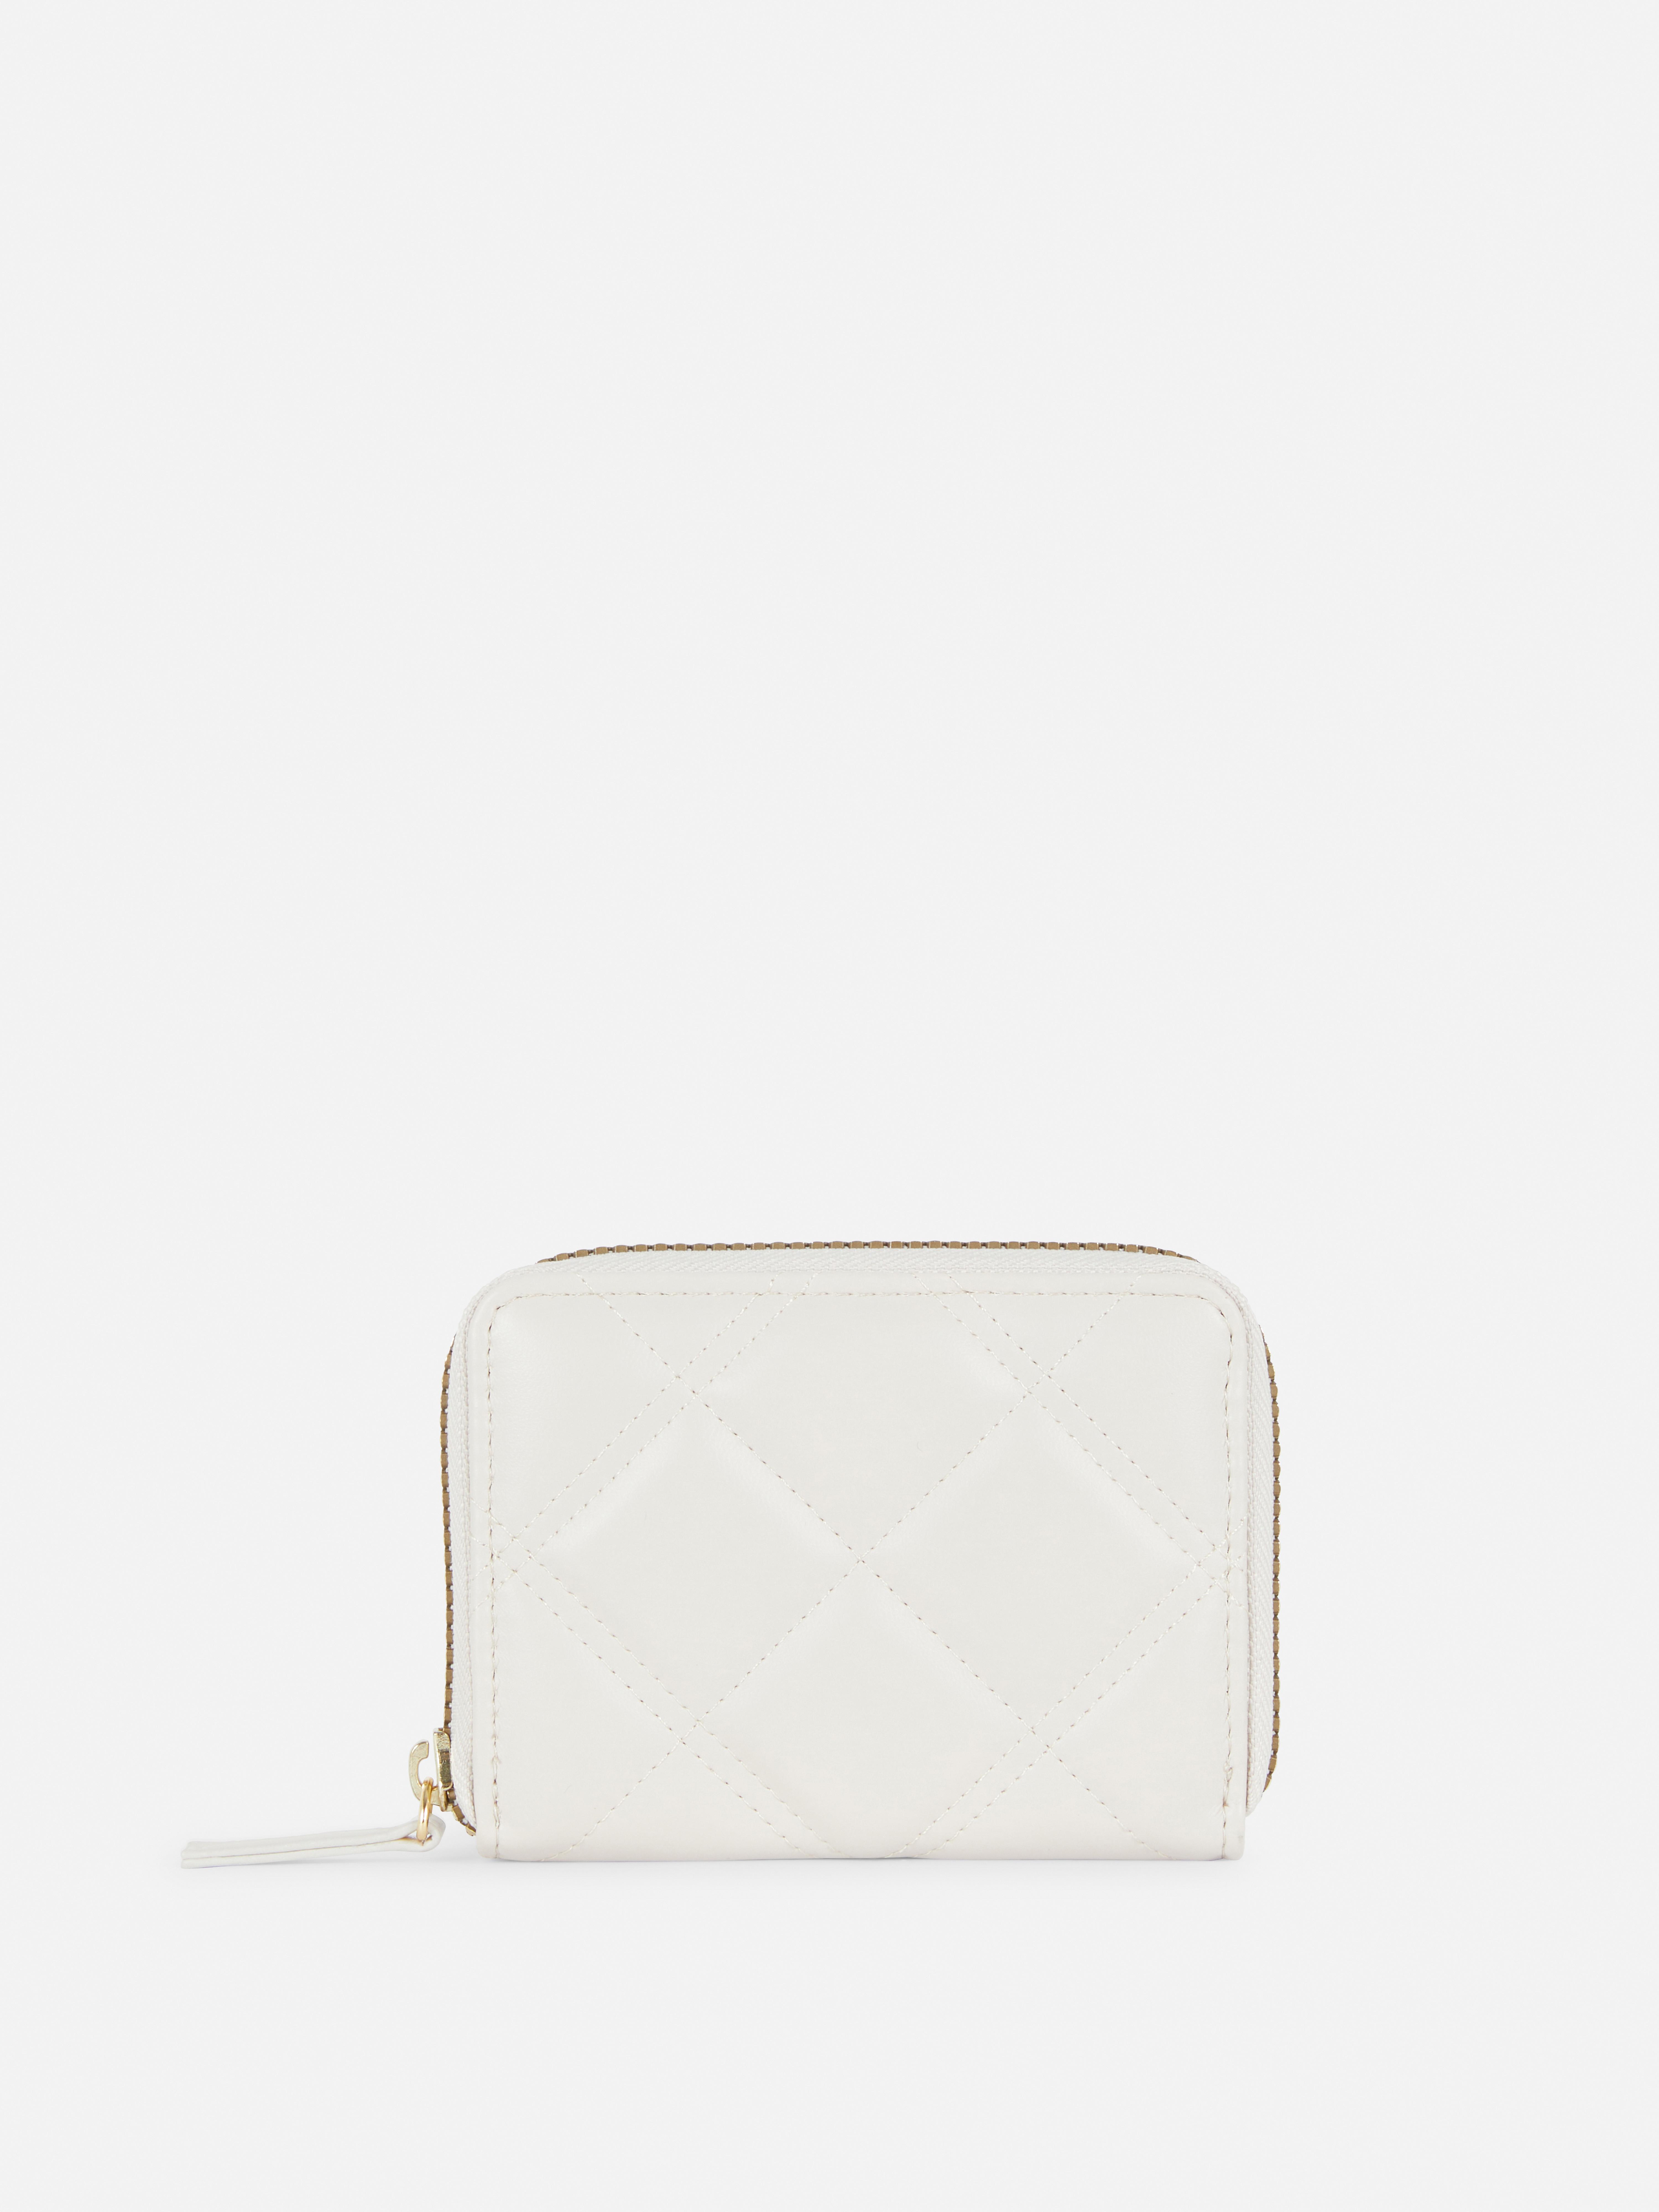 Omringd Hond belediging Quilted Faux Leather Mini Purse | Purses &amp; Card Holders | Women's  Handbags | Women's Accessories | Our Womenswear Collections | All Primark  Products | Primark